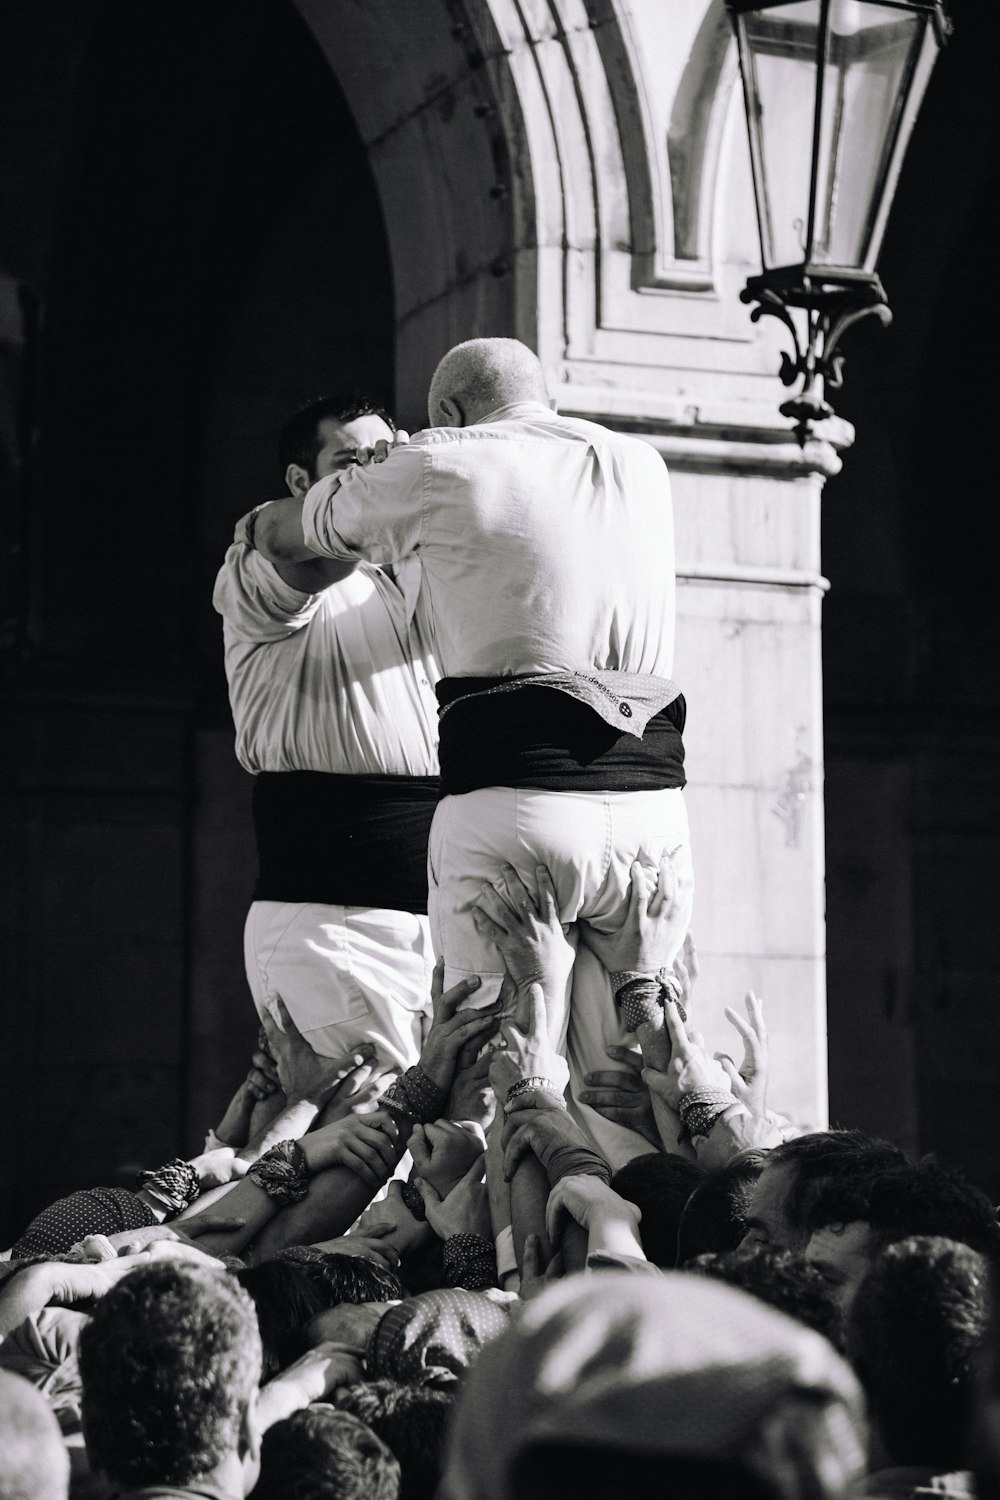 a man standing on a man's back